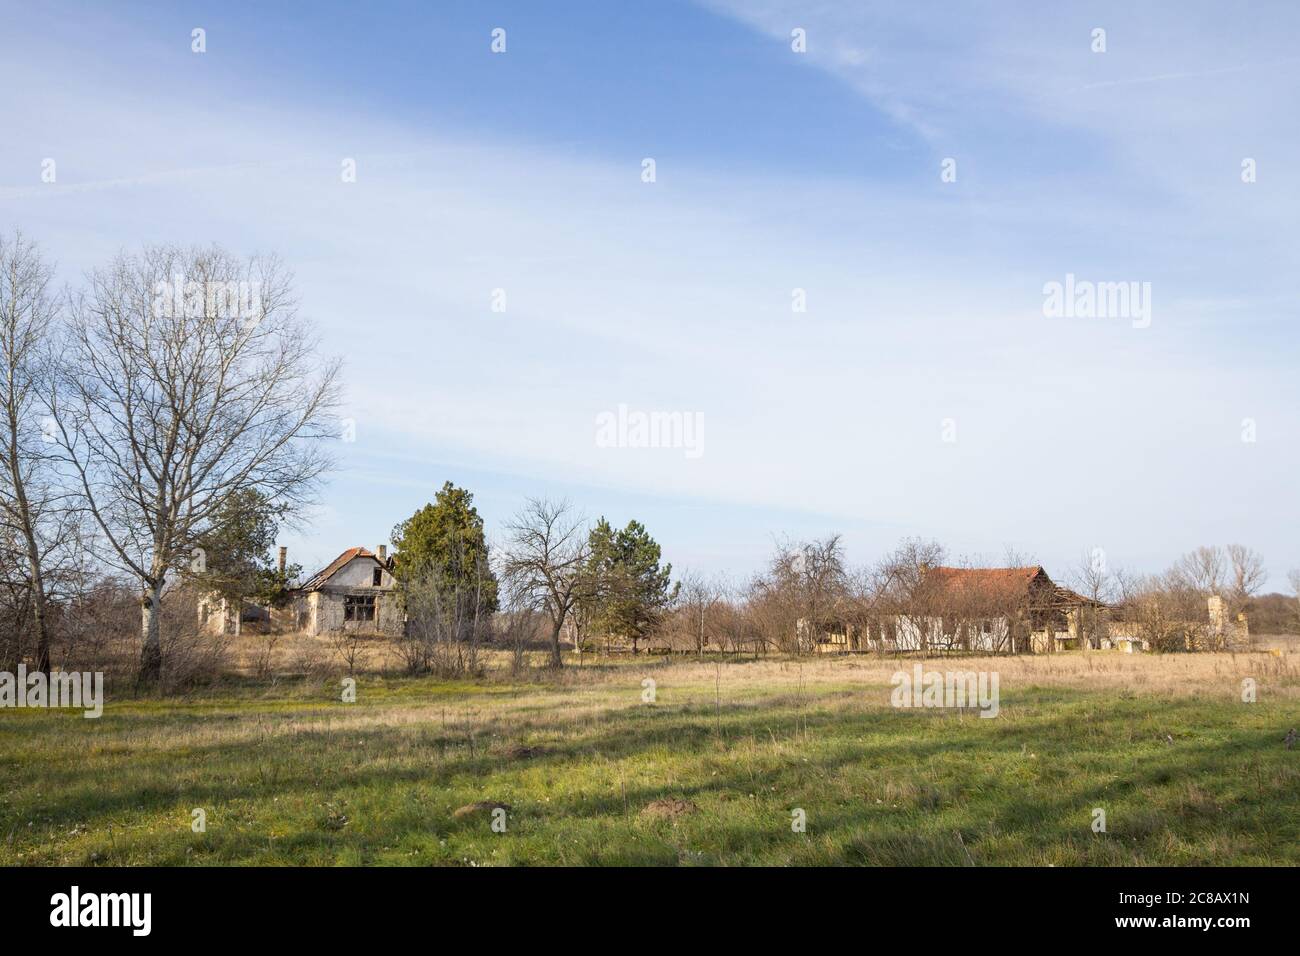 Panorama of an abandoned farm of Voivodina, in Serbia. The region of Balkans is hit by a severe rural exodus and emigration deserting the area.  Pictu Stock Photo